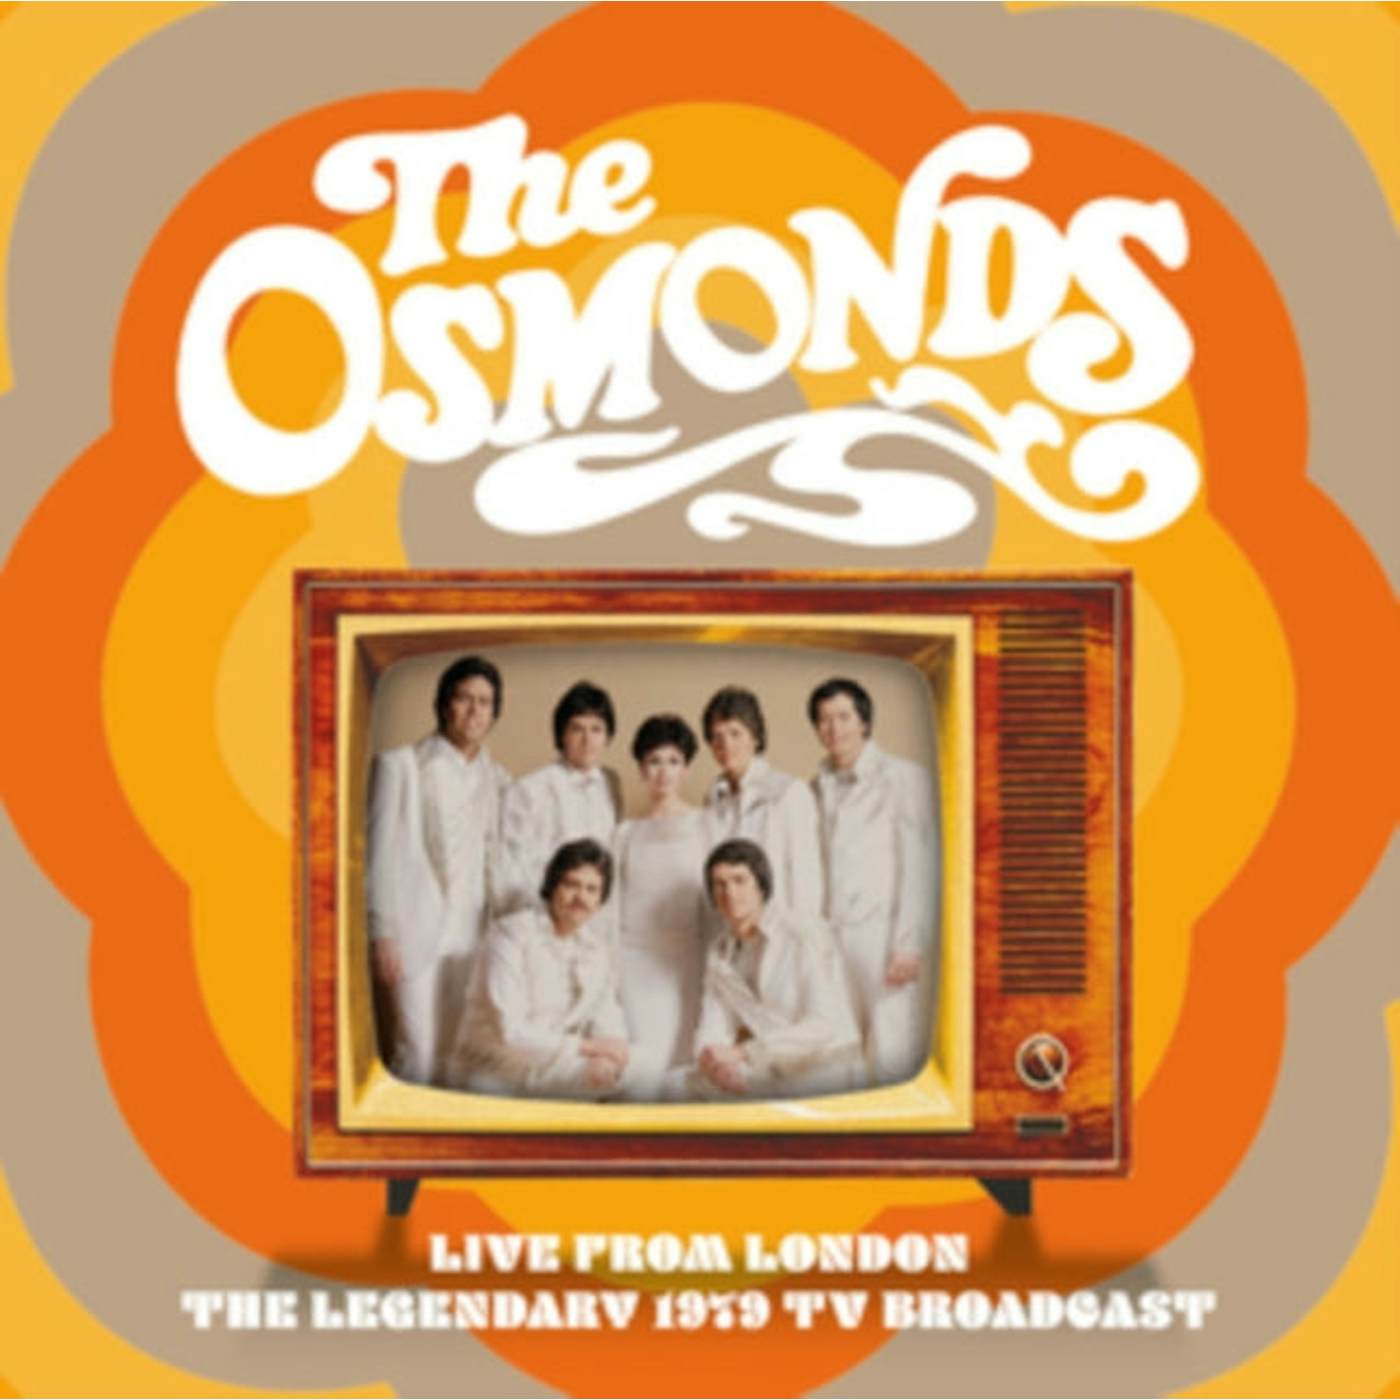 The Osmonds  CD - Live From London: The Legendary 1979 Tv Broadcast